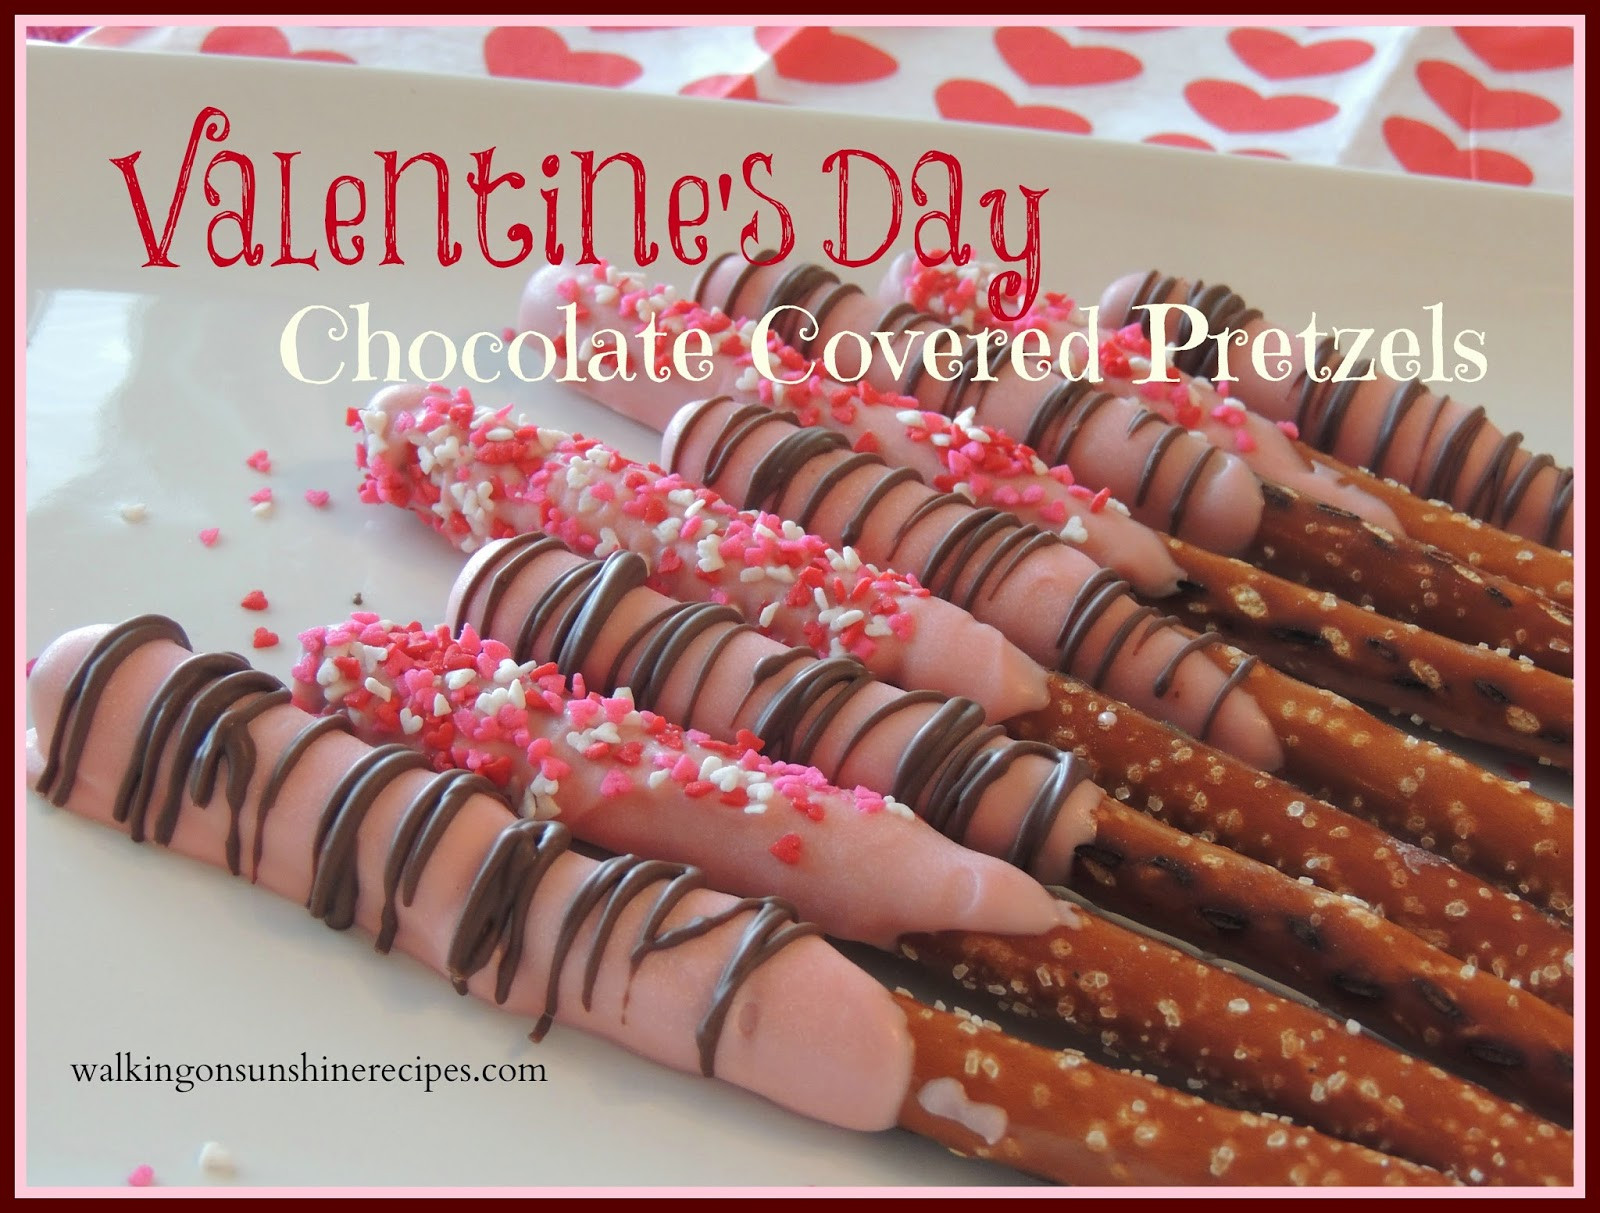 Chocolate Covered Pretzels For Valentine Day
 Valentine s Day Chocolate Covered Pretzels Walking on